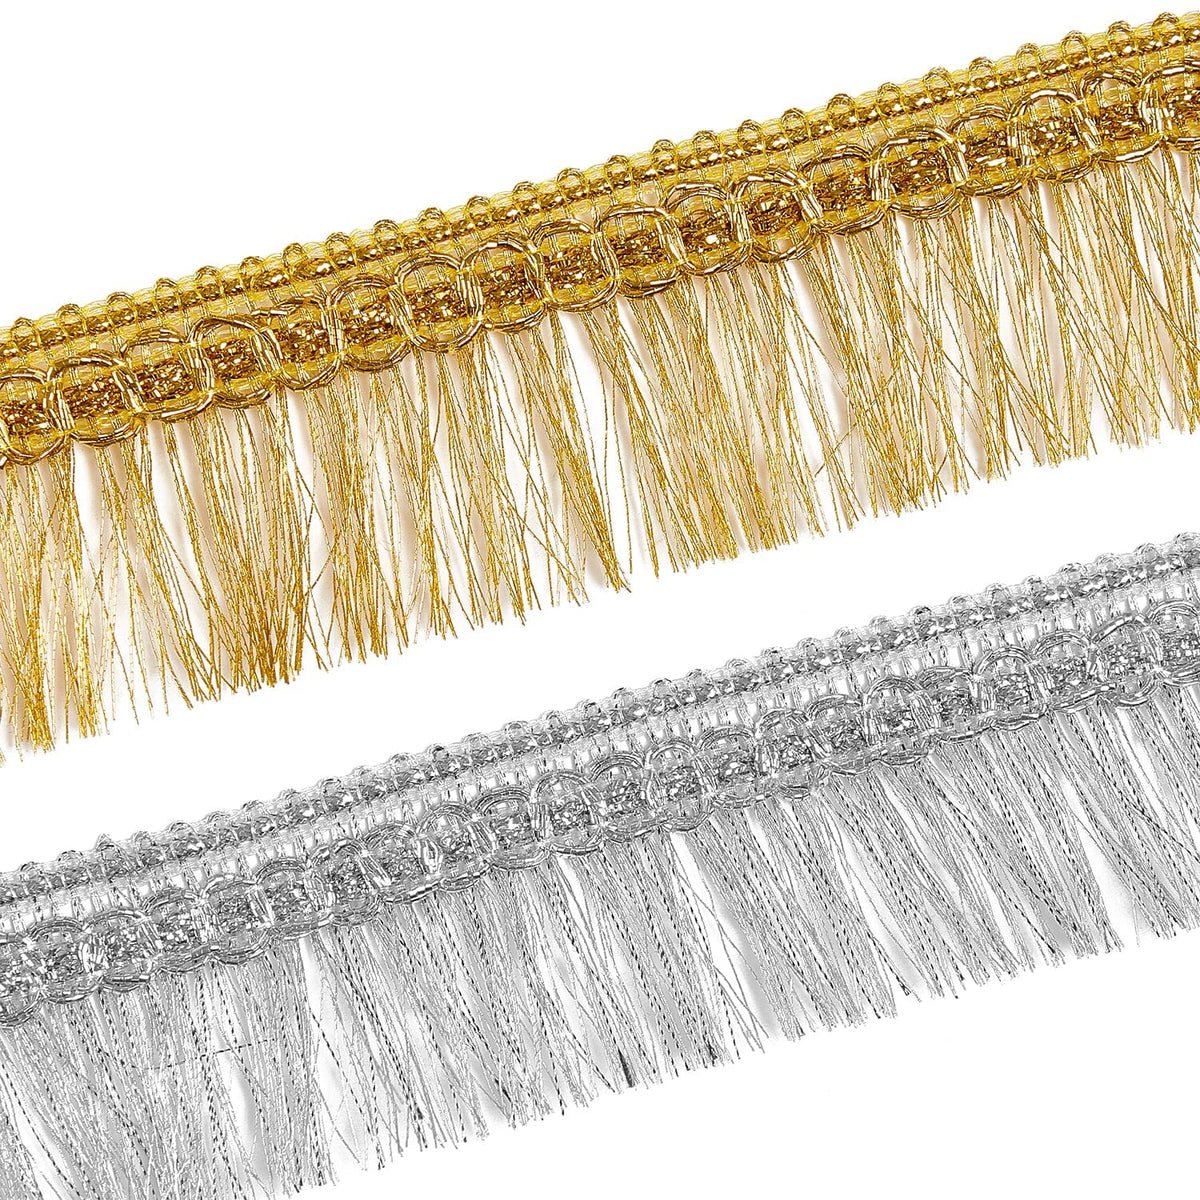 Expo Int'l 18 inch Metallic Chainette Fringe Trim by The Yard, Silver